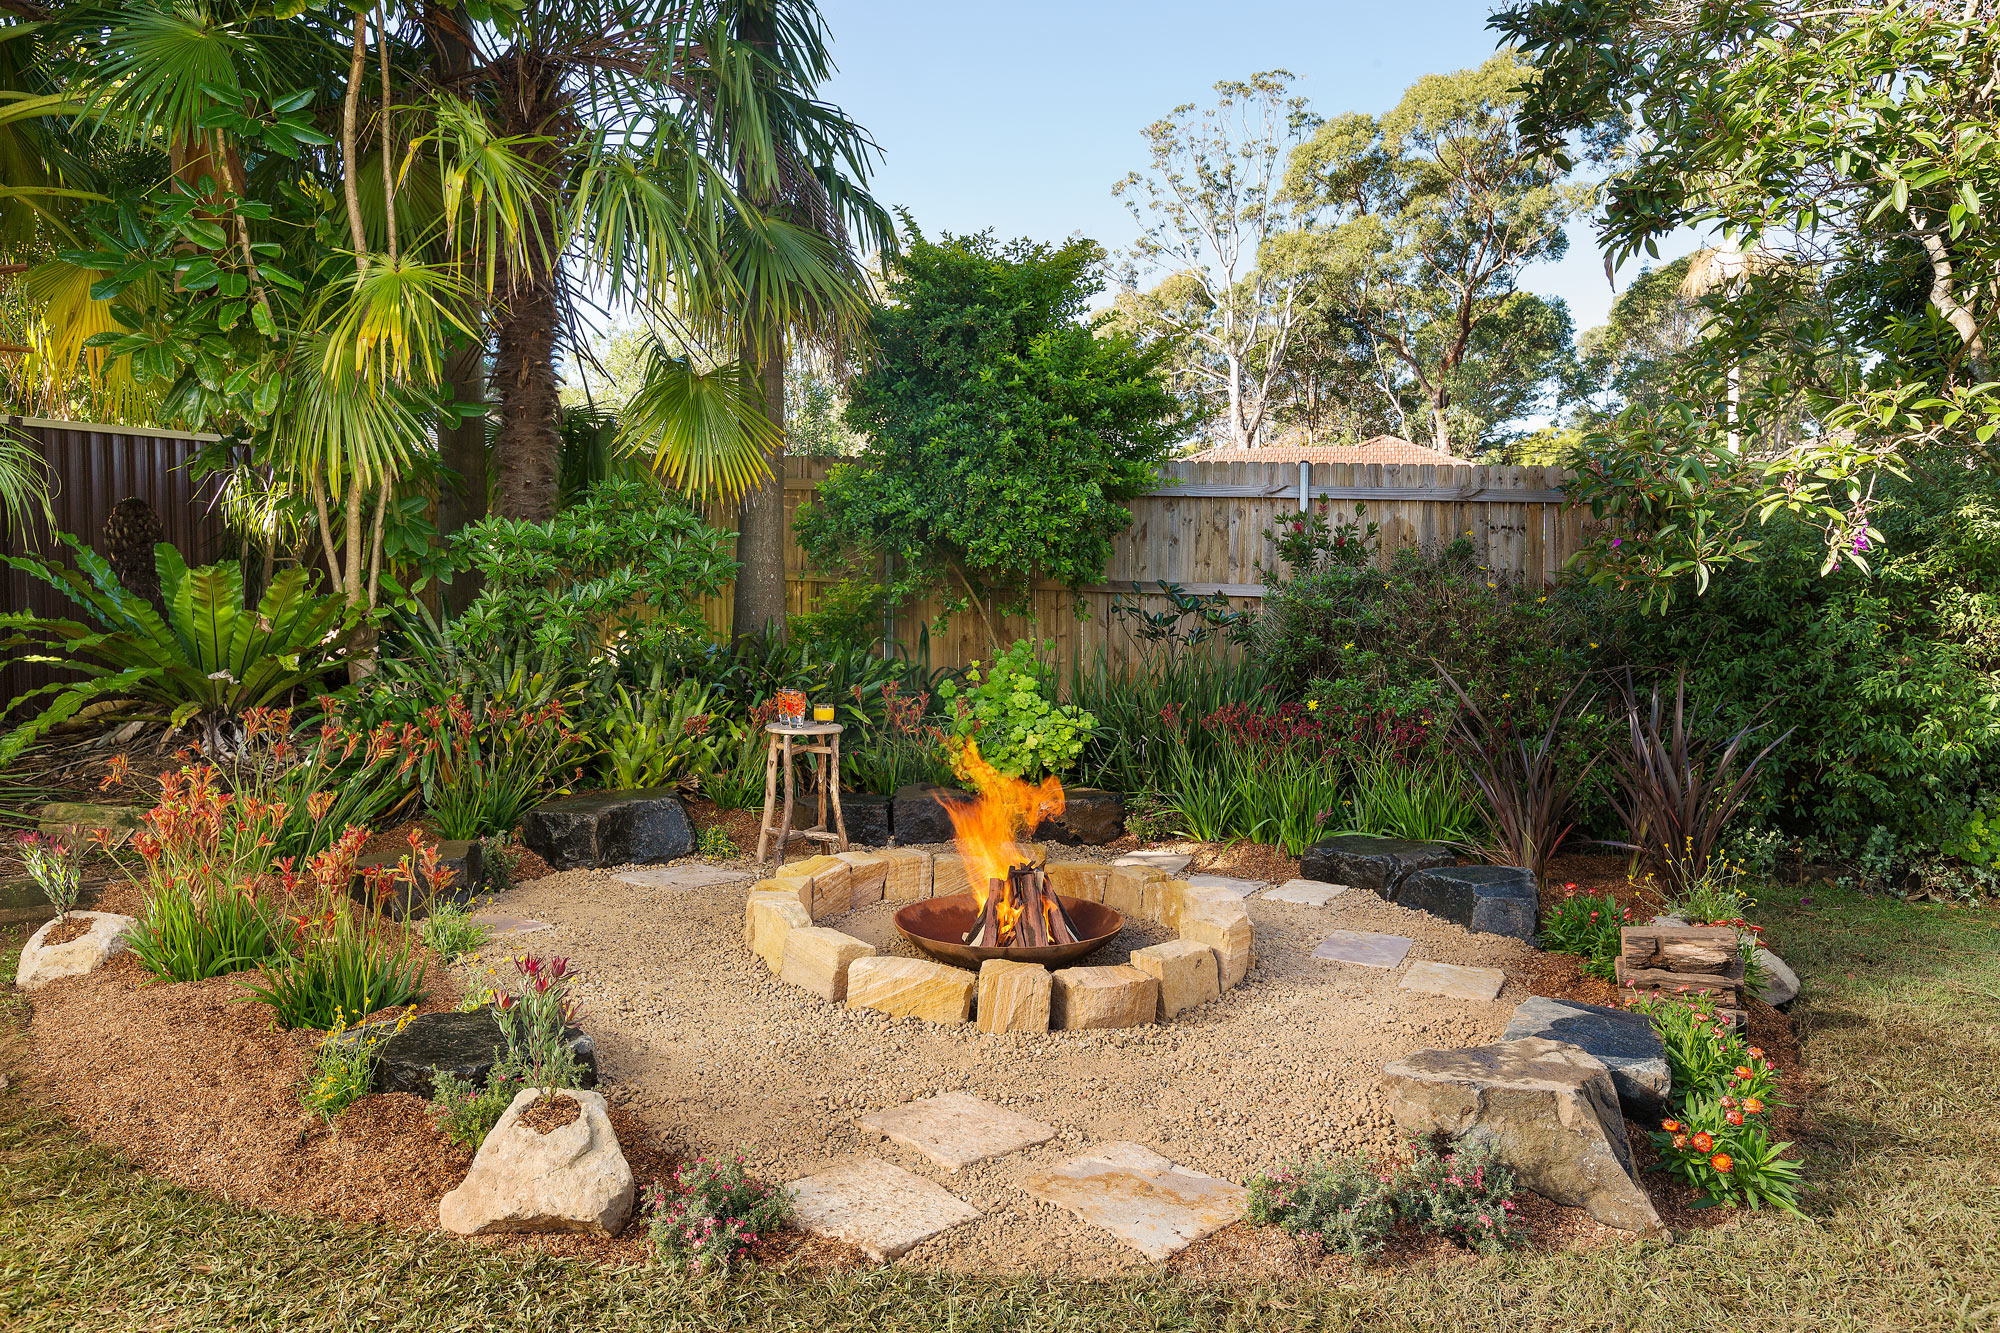 Make A Fire Pit In Your Backyard, Landscaping Around Fire Pit